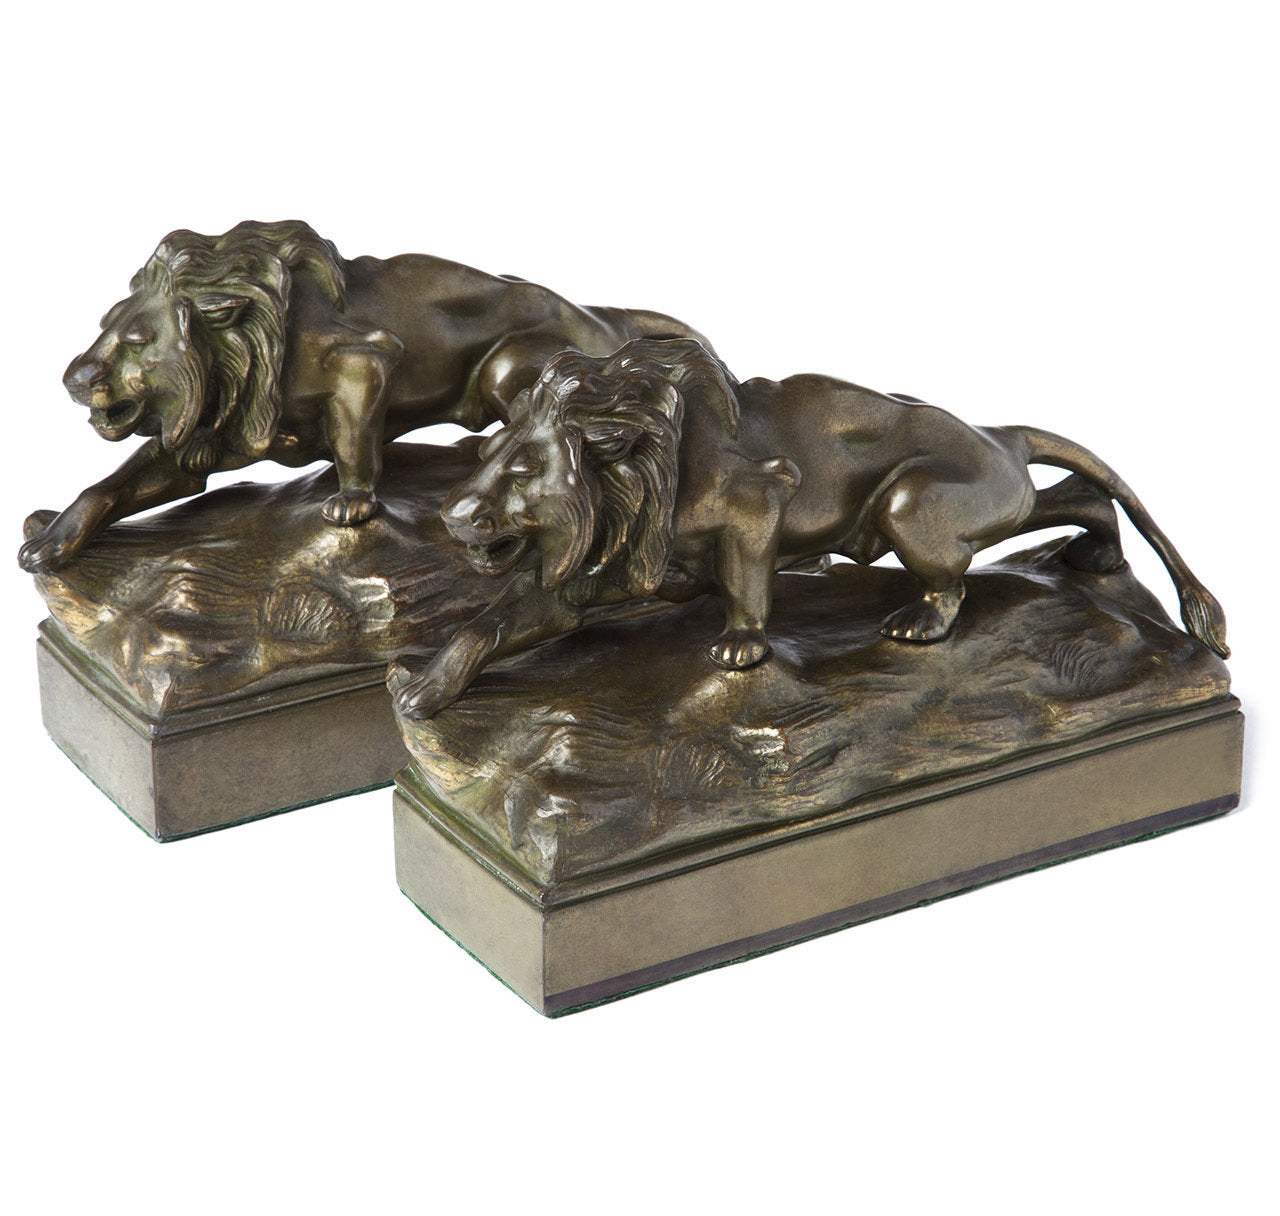 Stealthy Lion Bookends